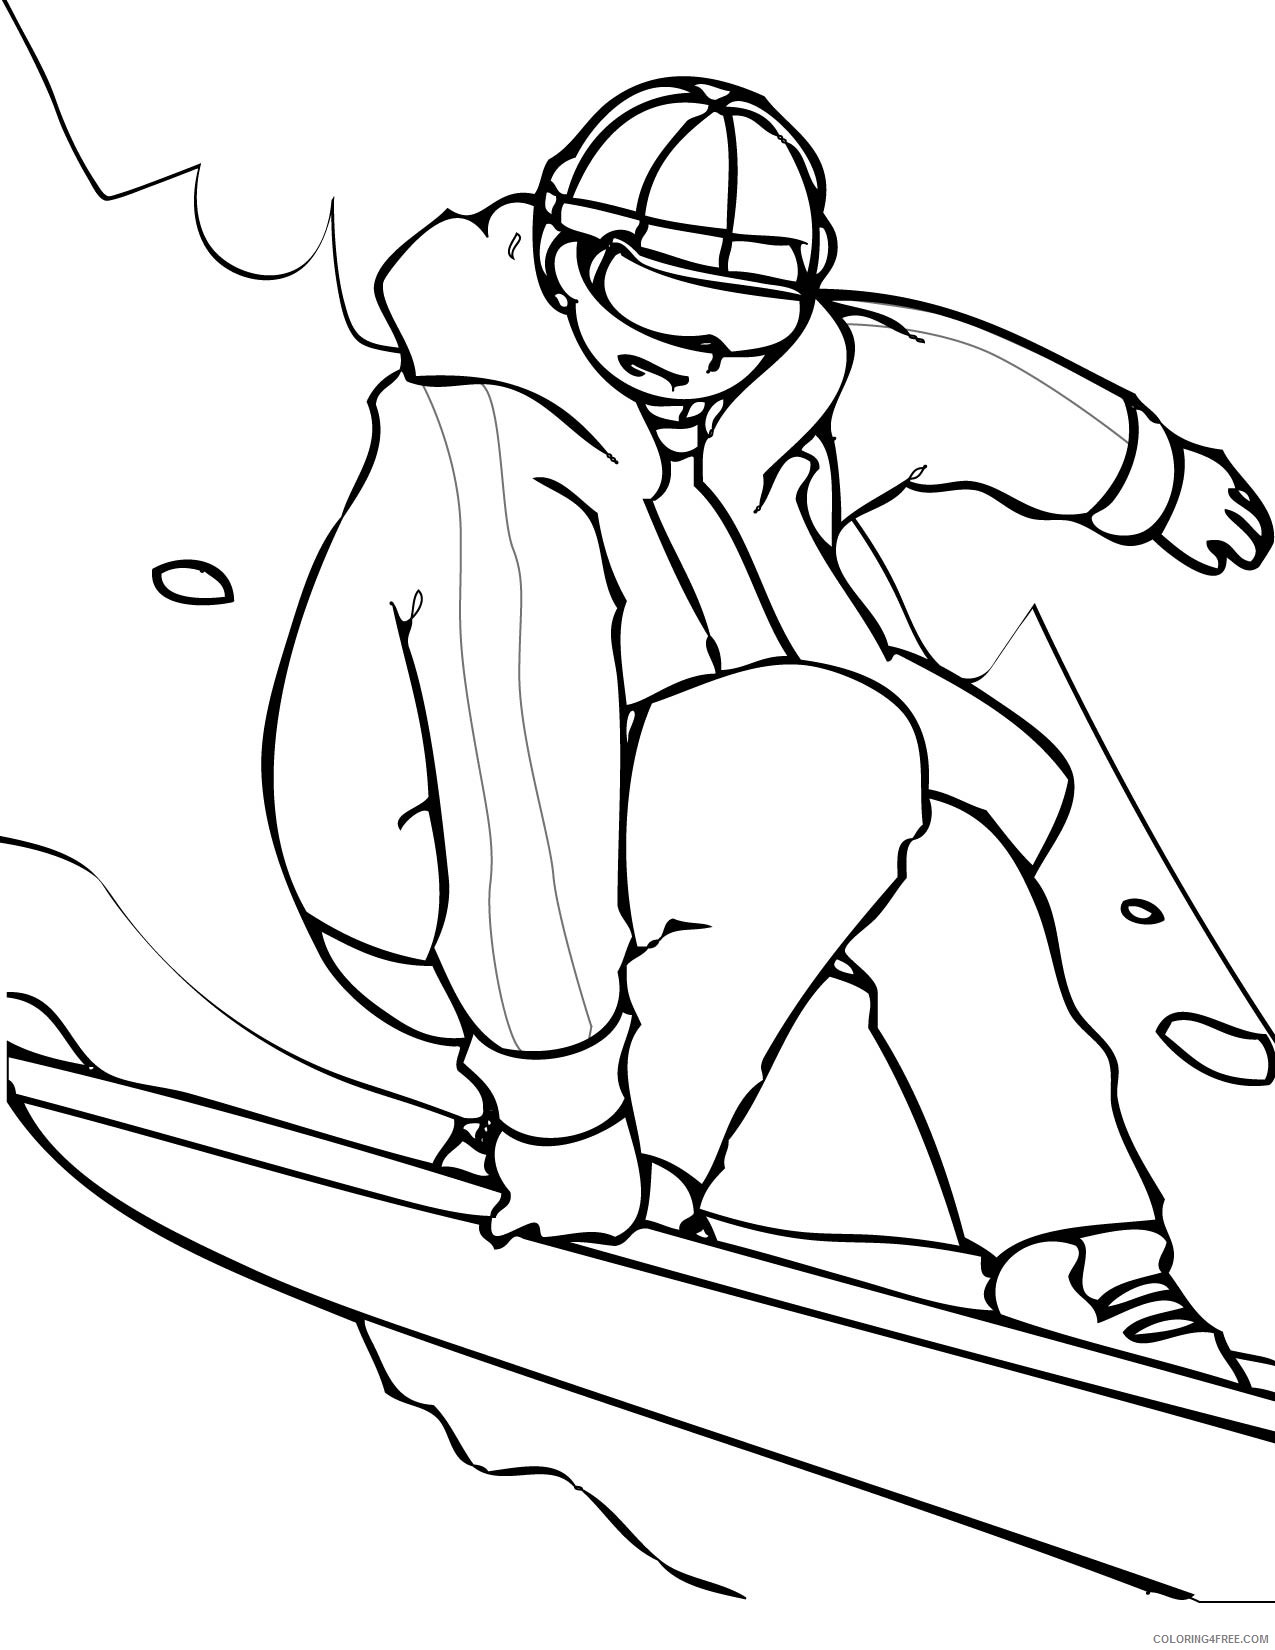 sports coloring pages snowboarding Coloring4free